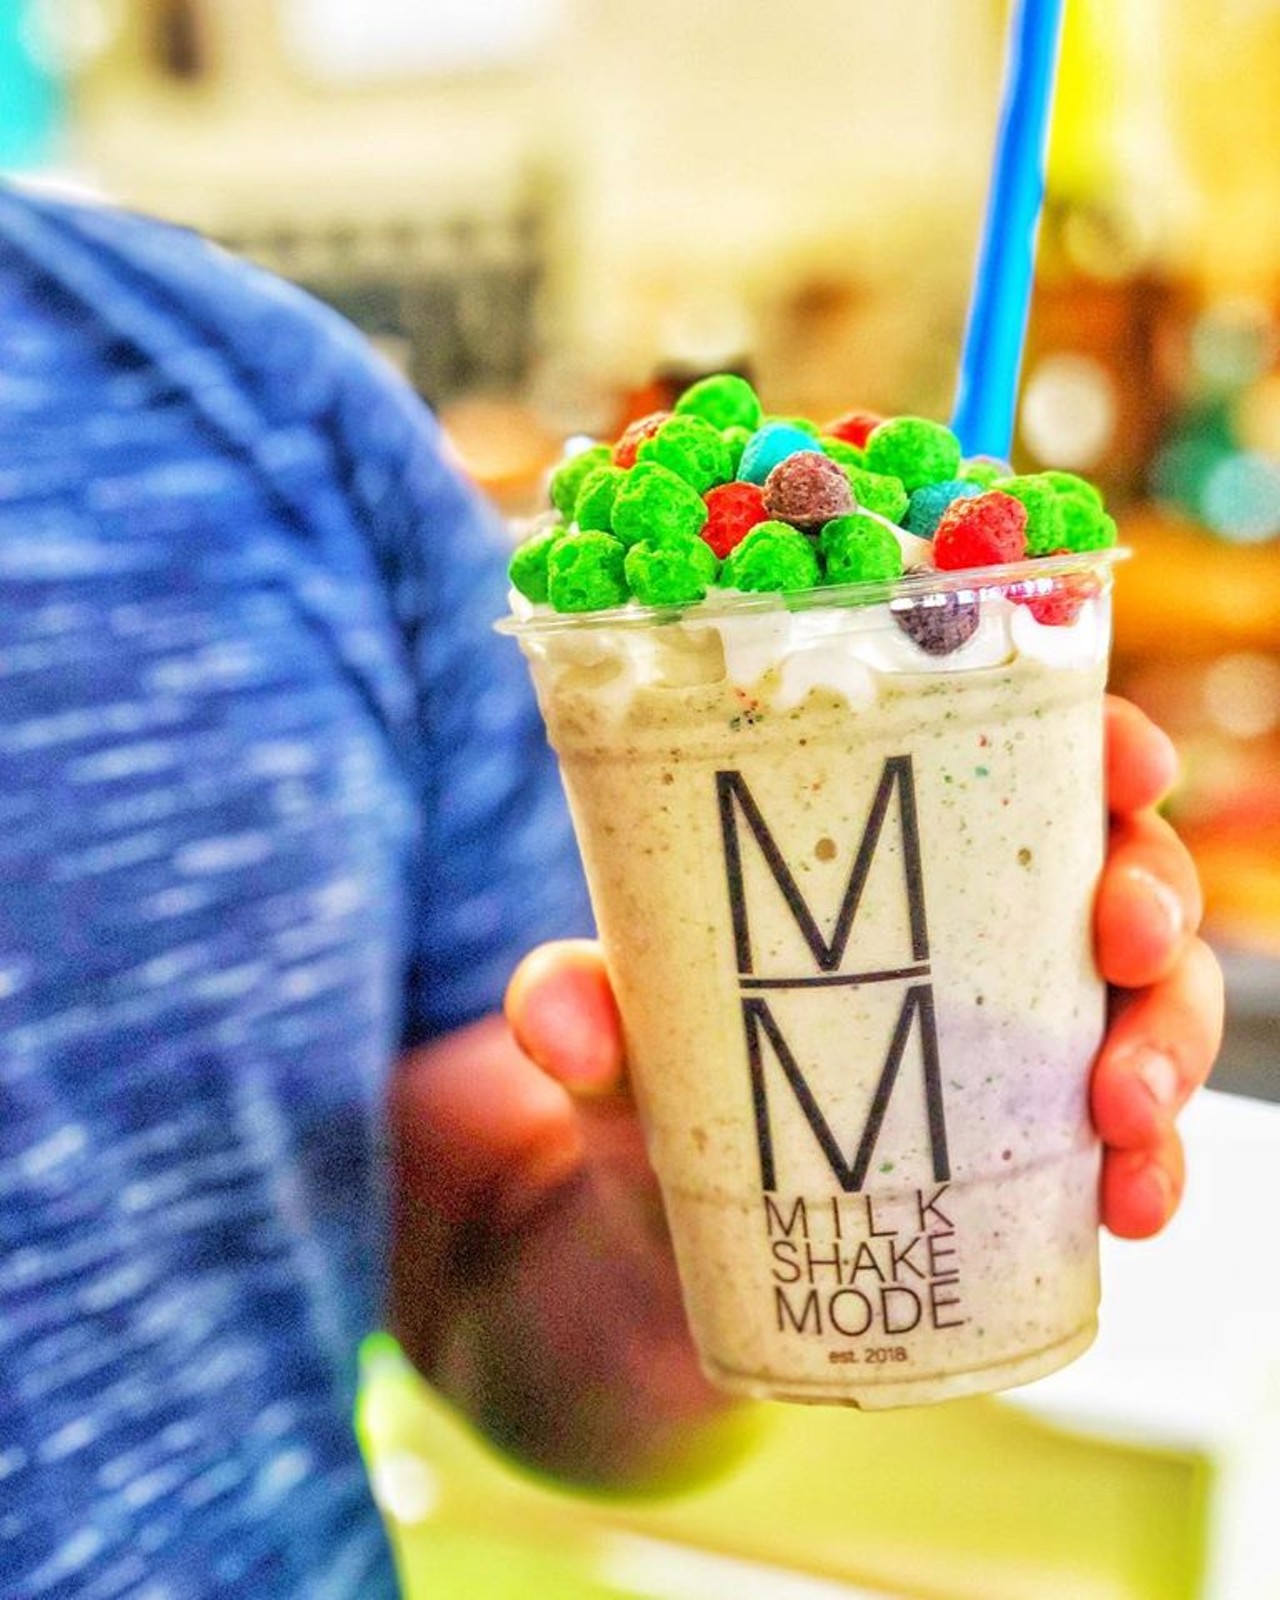 Don't miss Milkshake Mode's next joint pop up with Cereal Killer Sweets this Saturday from February 8th 12-4pm; check their Facebook for details.